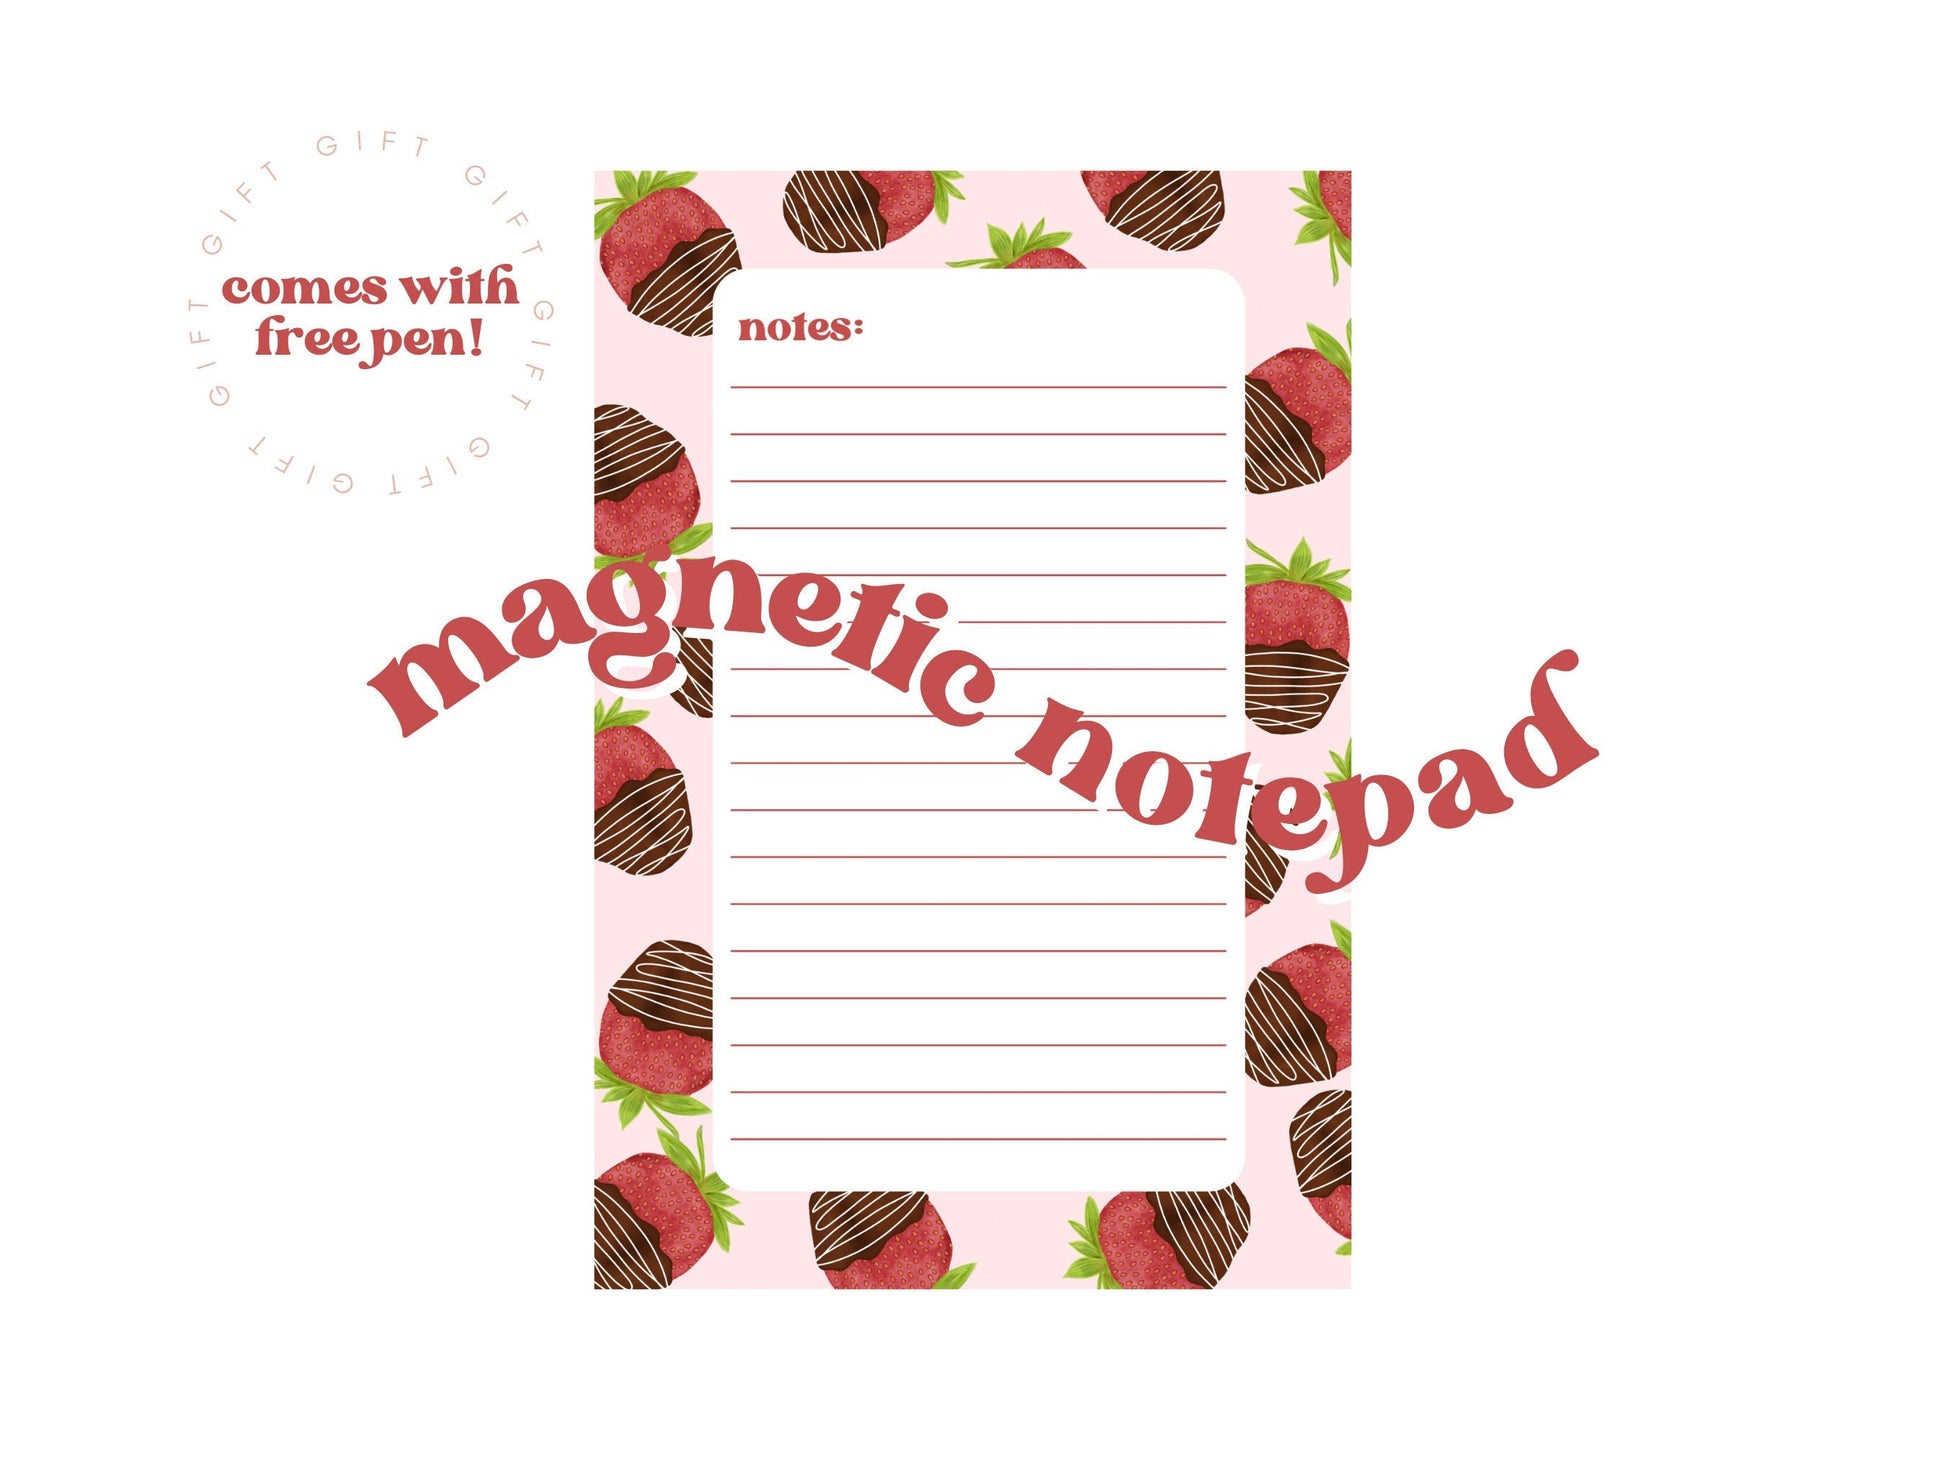 Magnetic Lined Notepad Bundle Featuring Chocolate-Covered Strawberries, Pizza & Fried Egg Illustrations | The Magnet Maiden